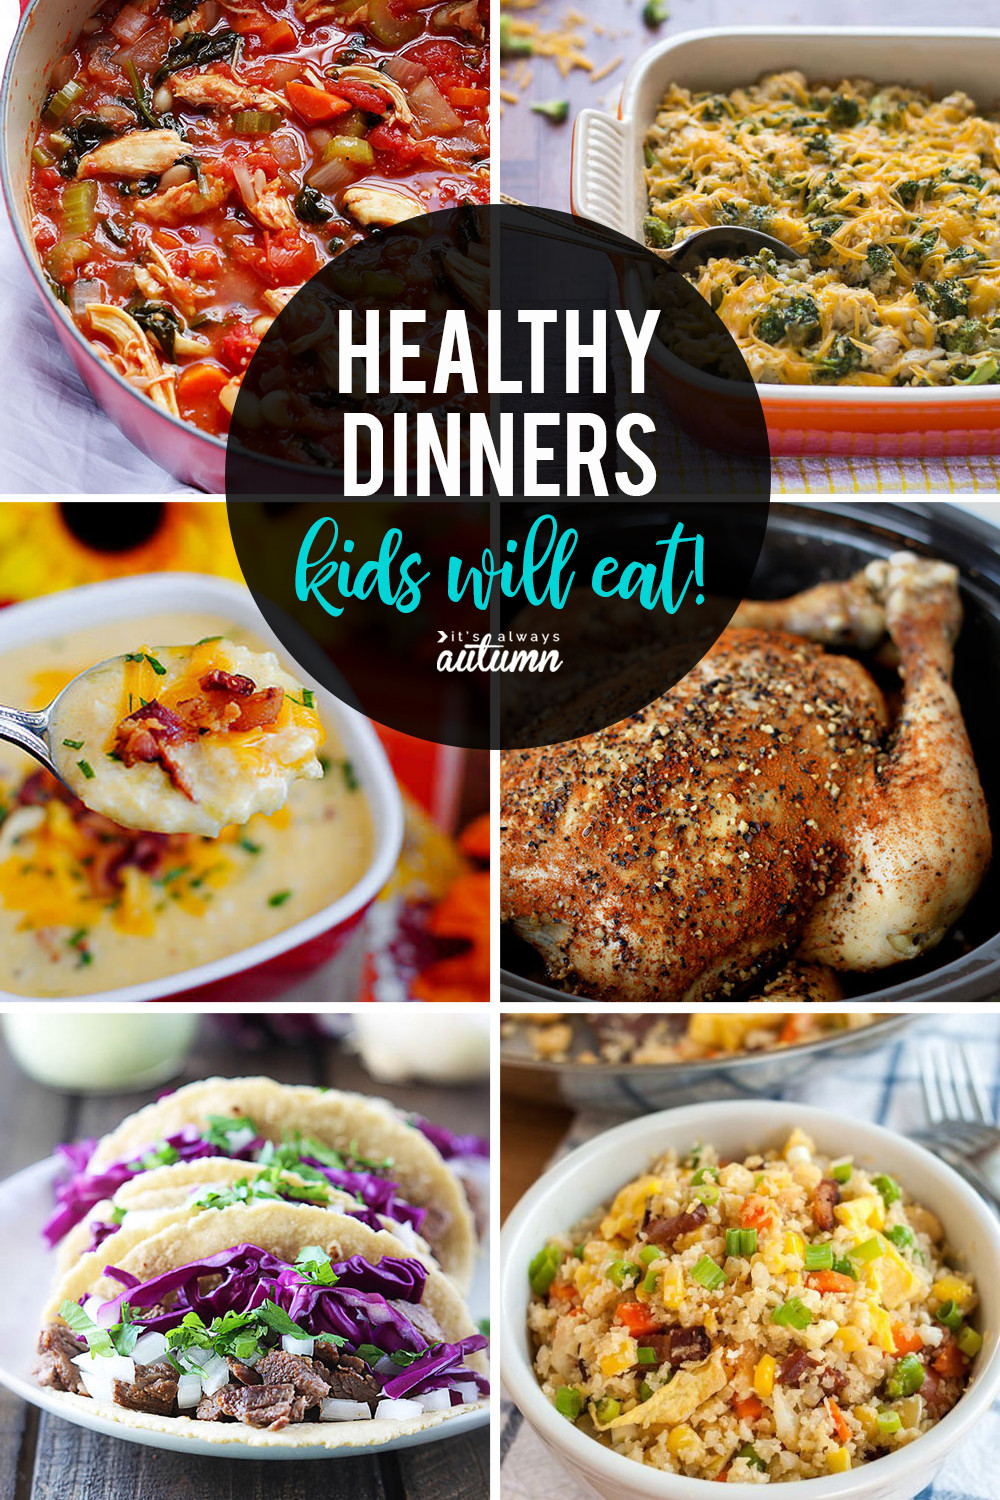 Healthy Recipes For Picky Kids
 20 healthy easy recipes your kids will actually want to